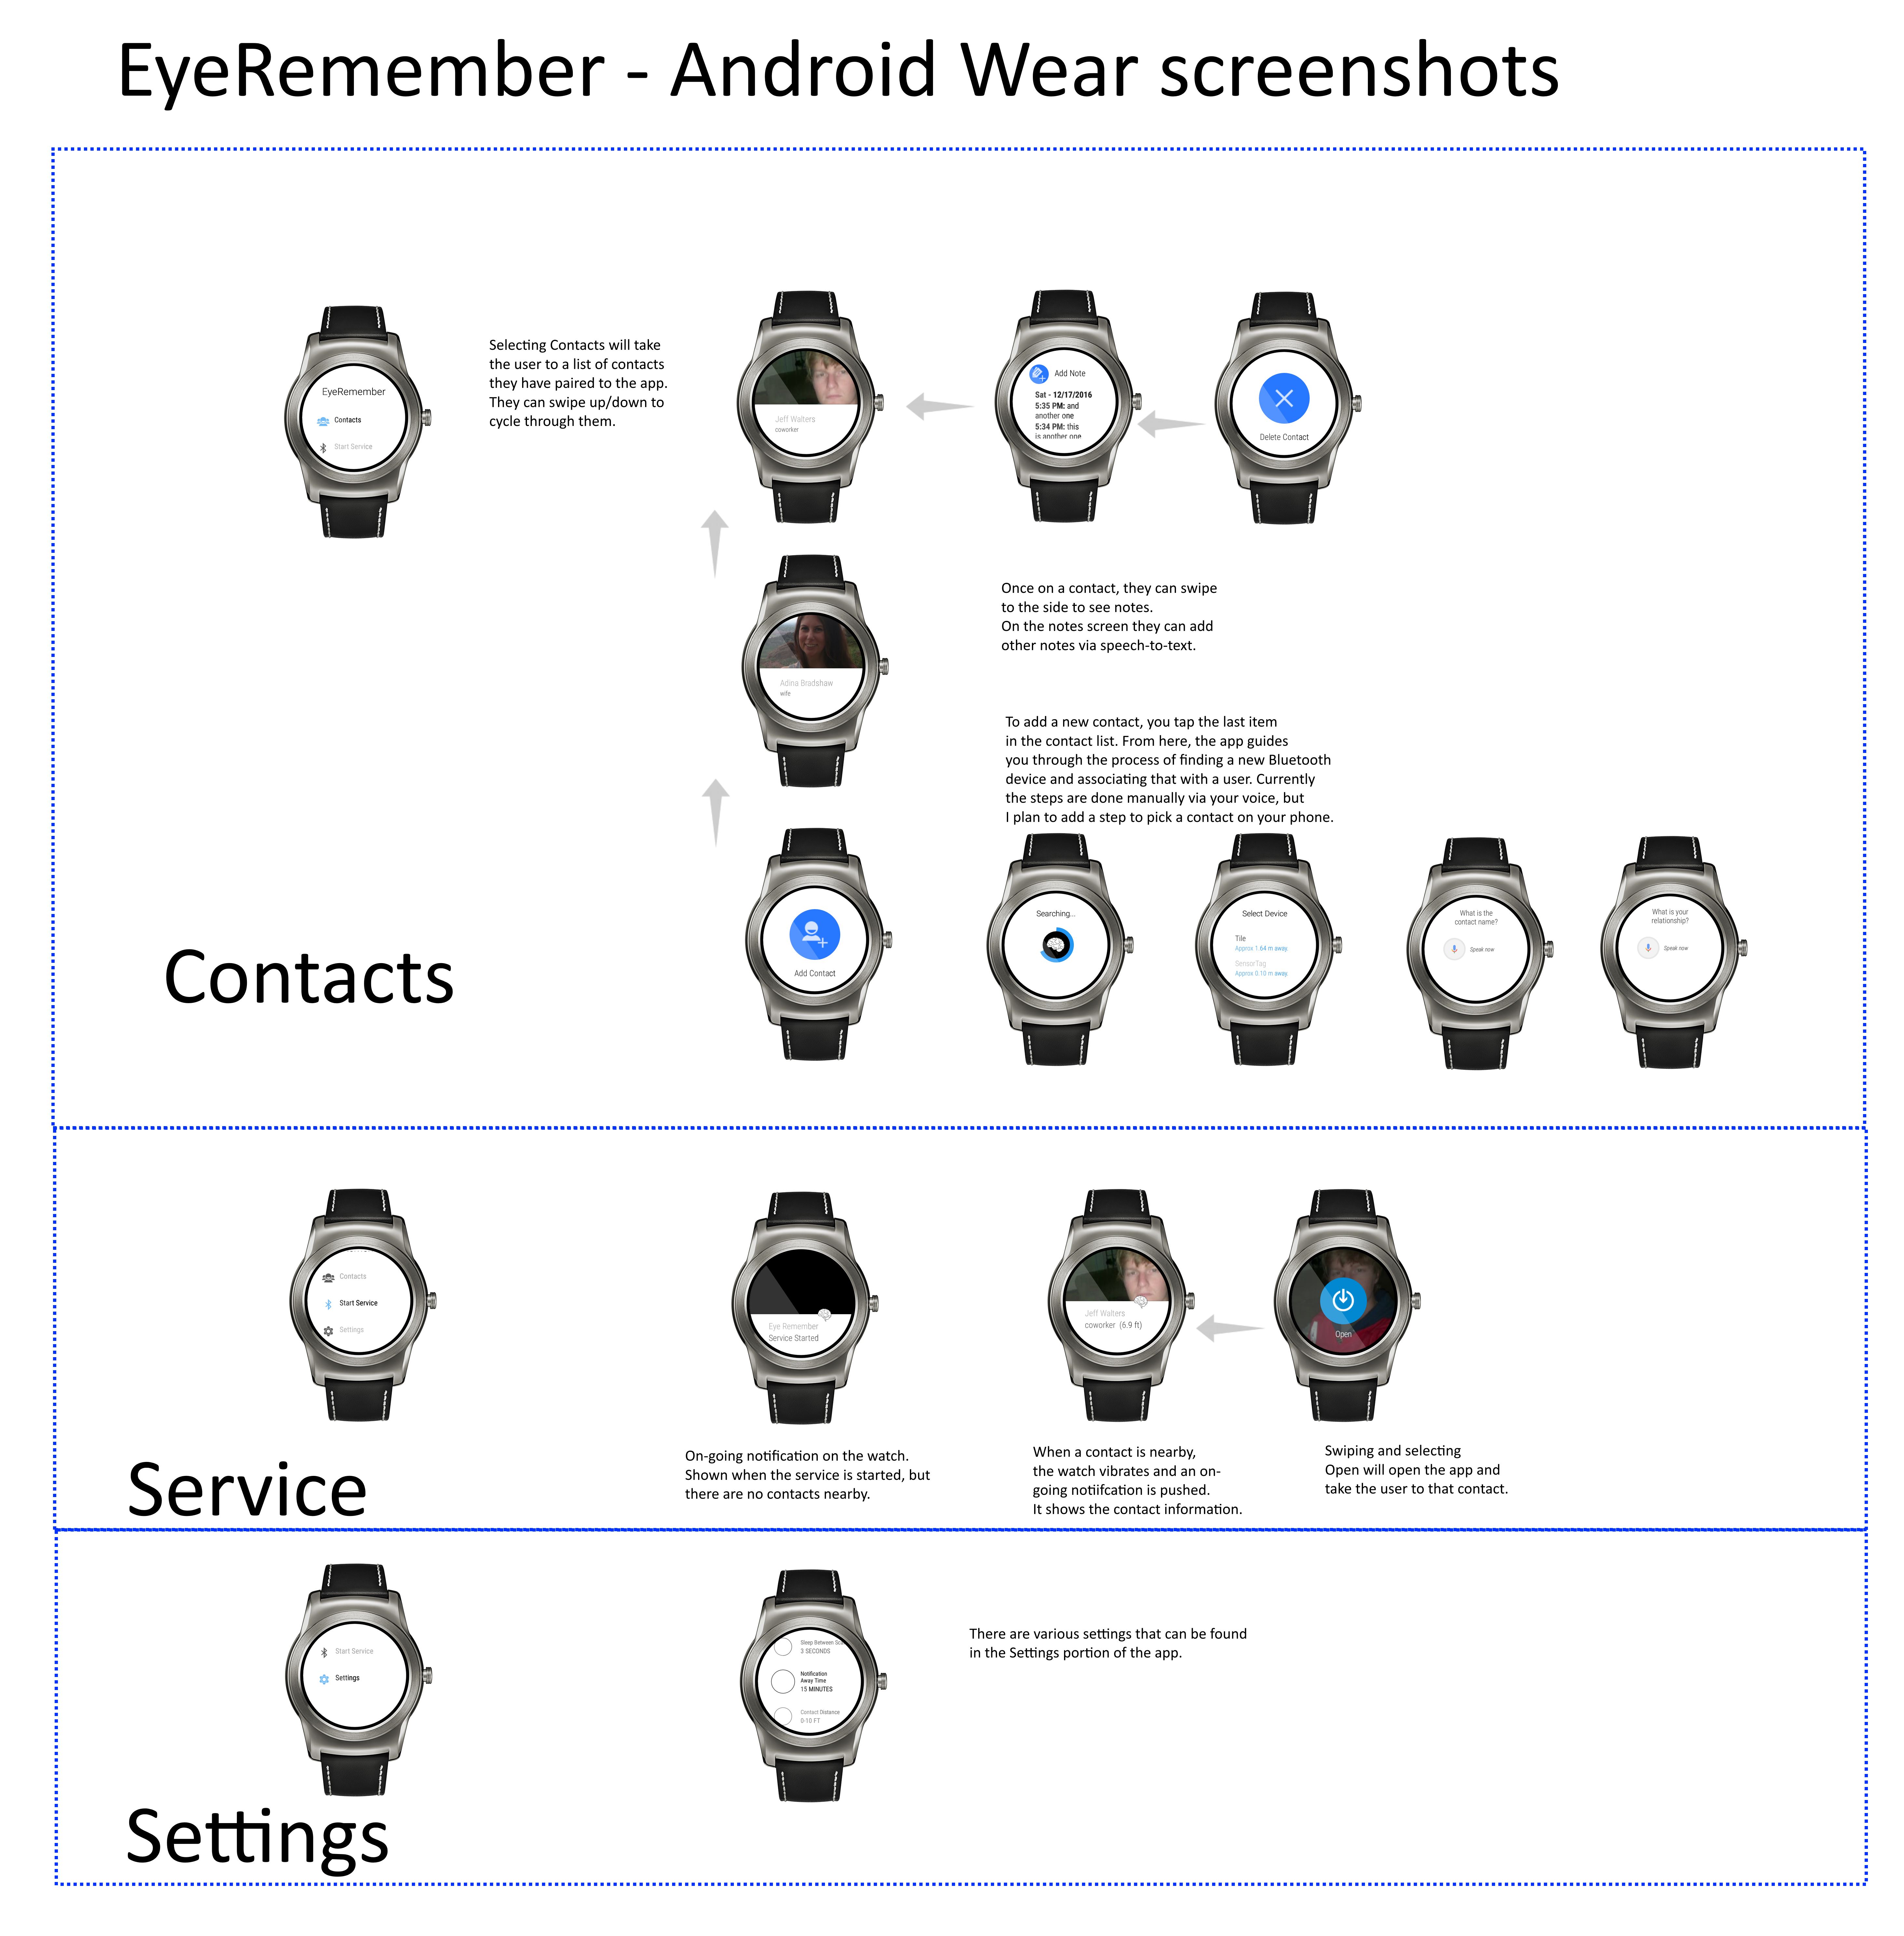 Screenshots of EyeRemember for Android Wear